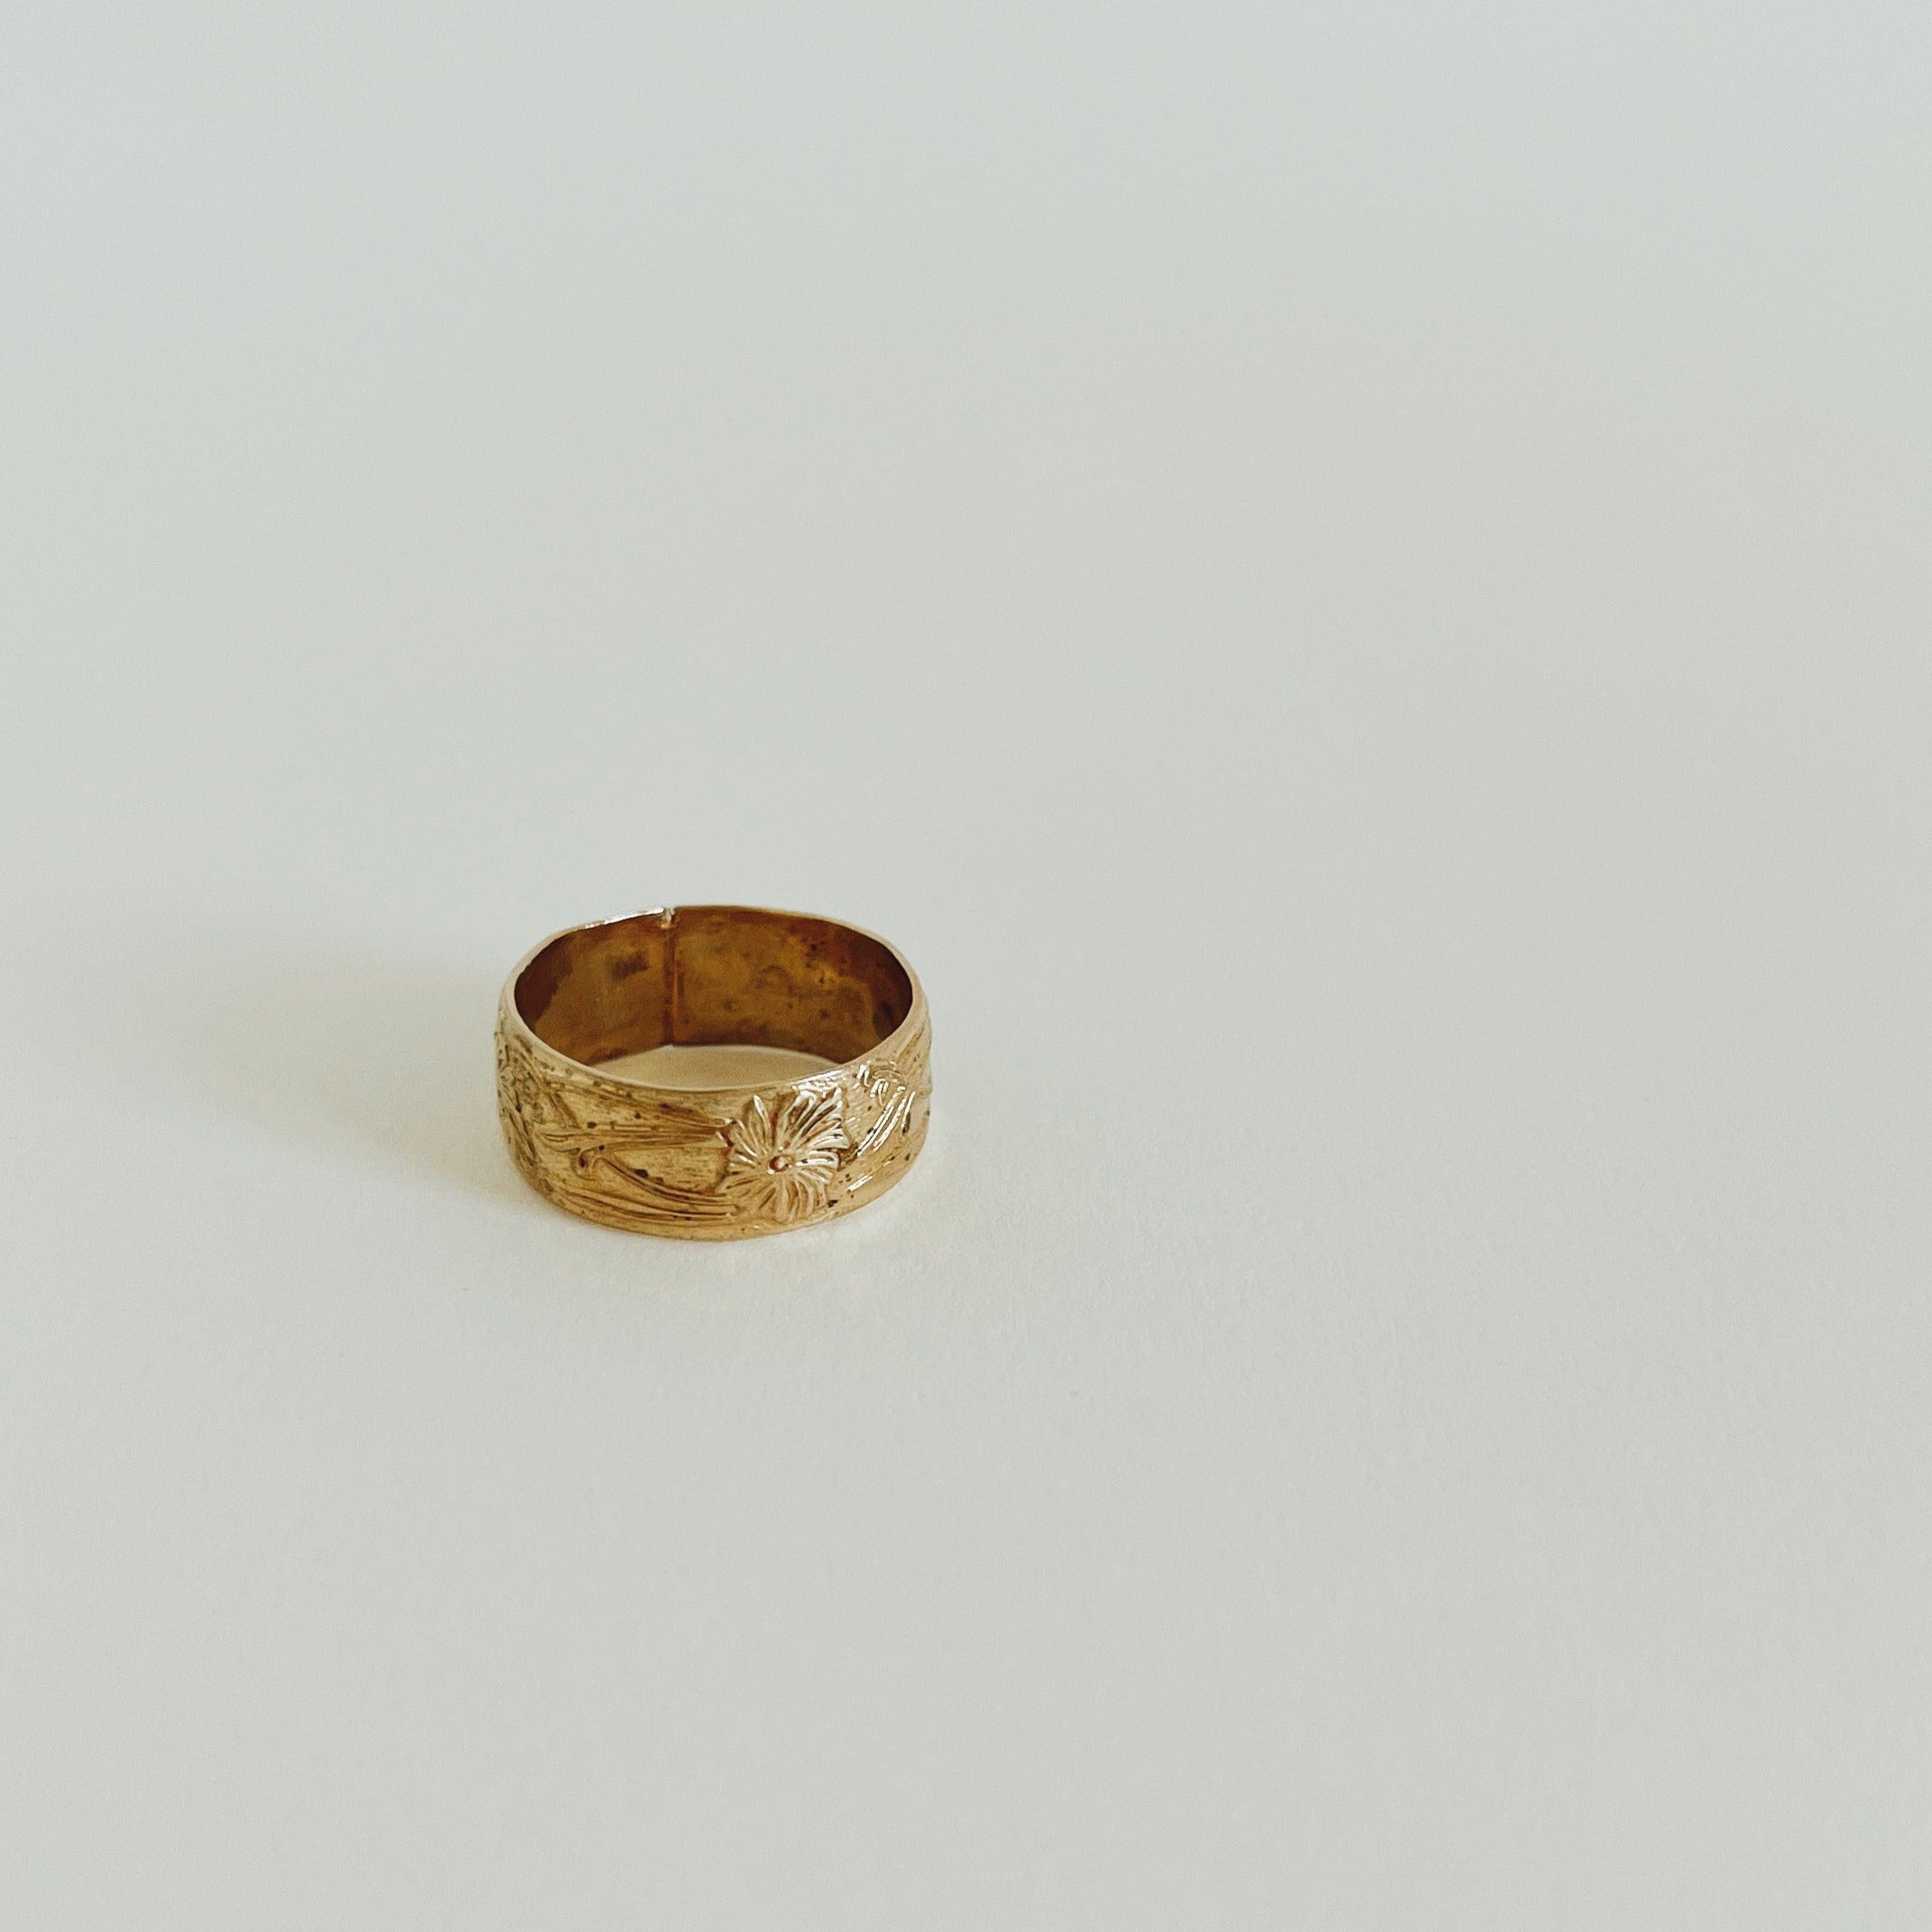 think gold ring with engraved flowers on white background. 